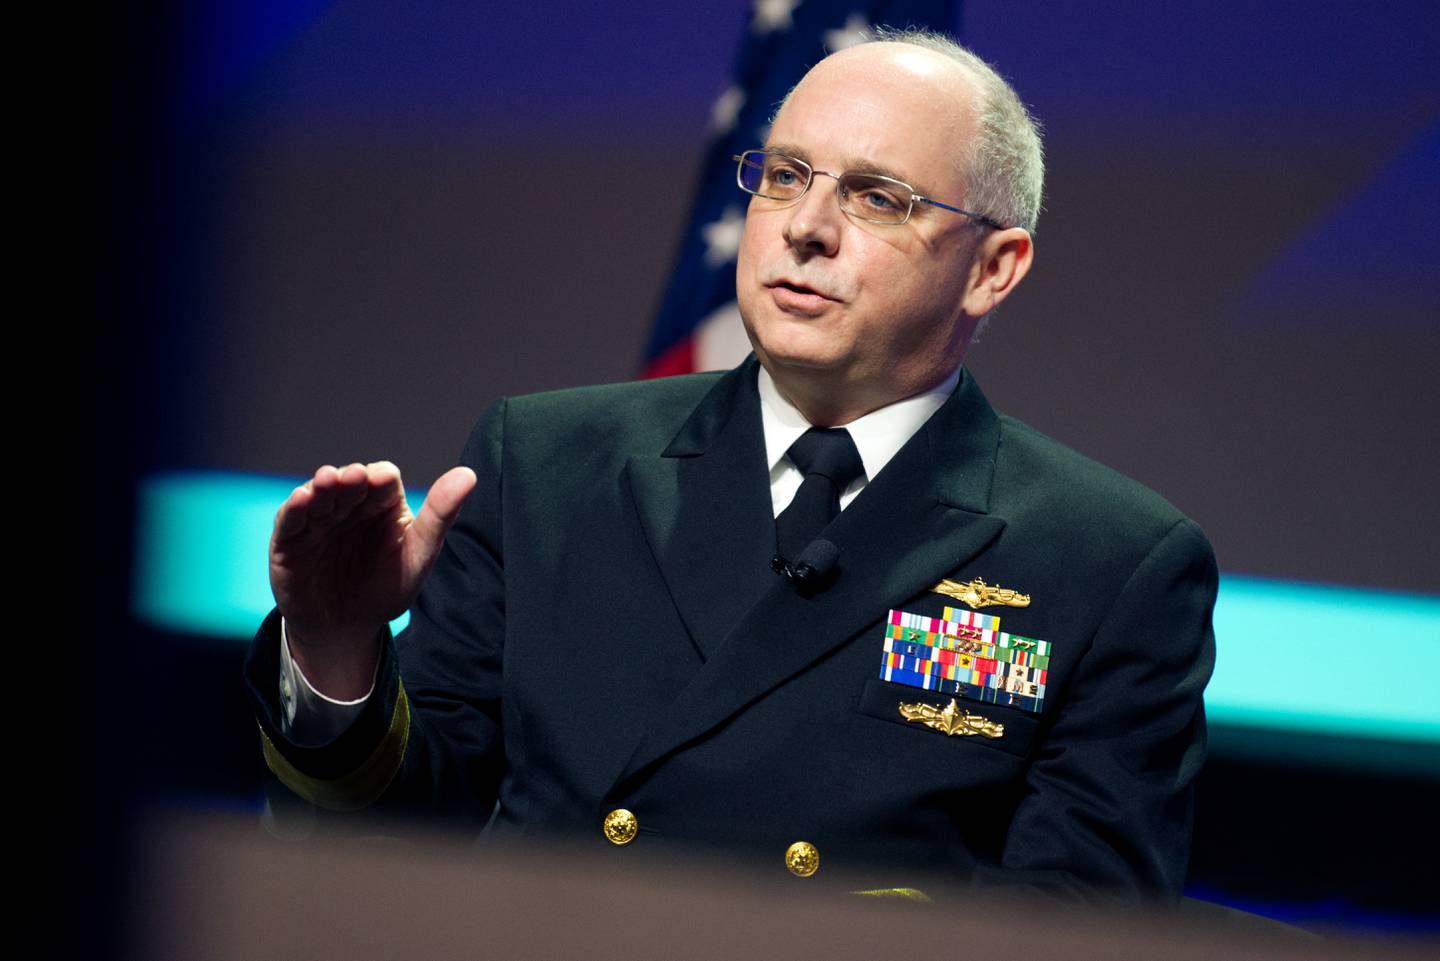 U.S. Navy Rear Adm. Stephen Donald, deputy commander of the 10th Fleet, speaks at a maritime cybersecurity panel at the Sea-Air-Space conference in National Harbor, Maryland, in April 2023.